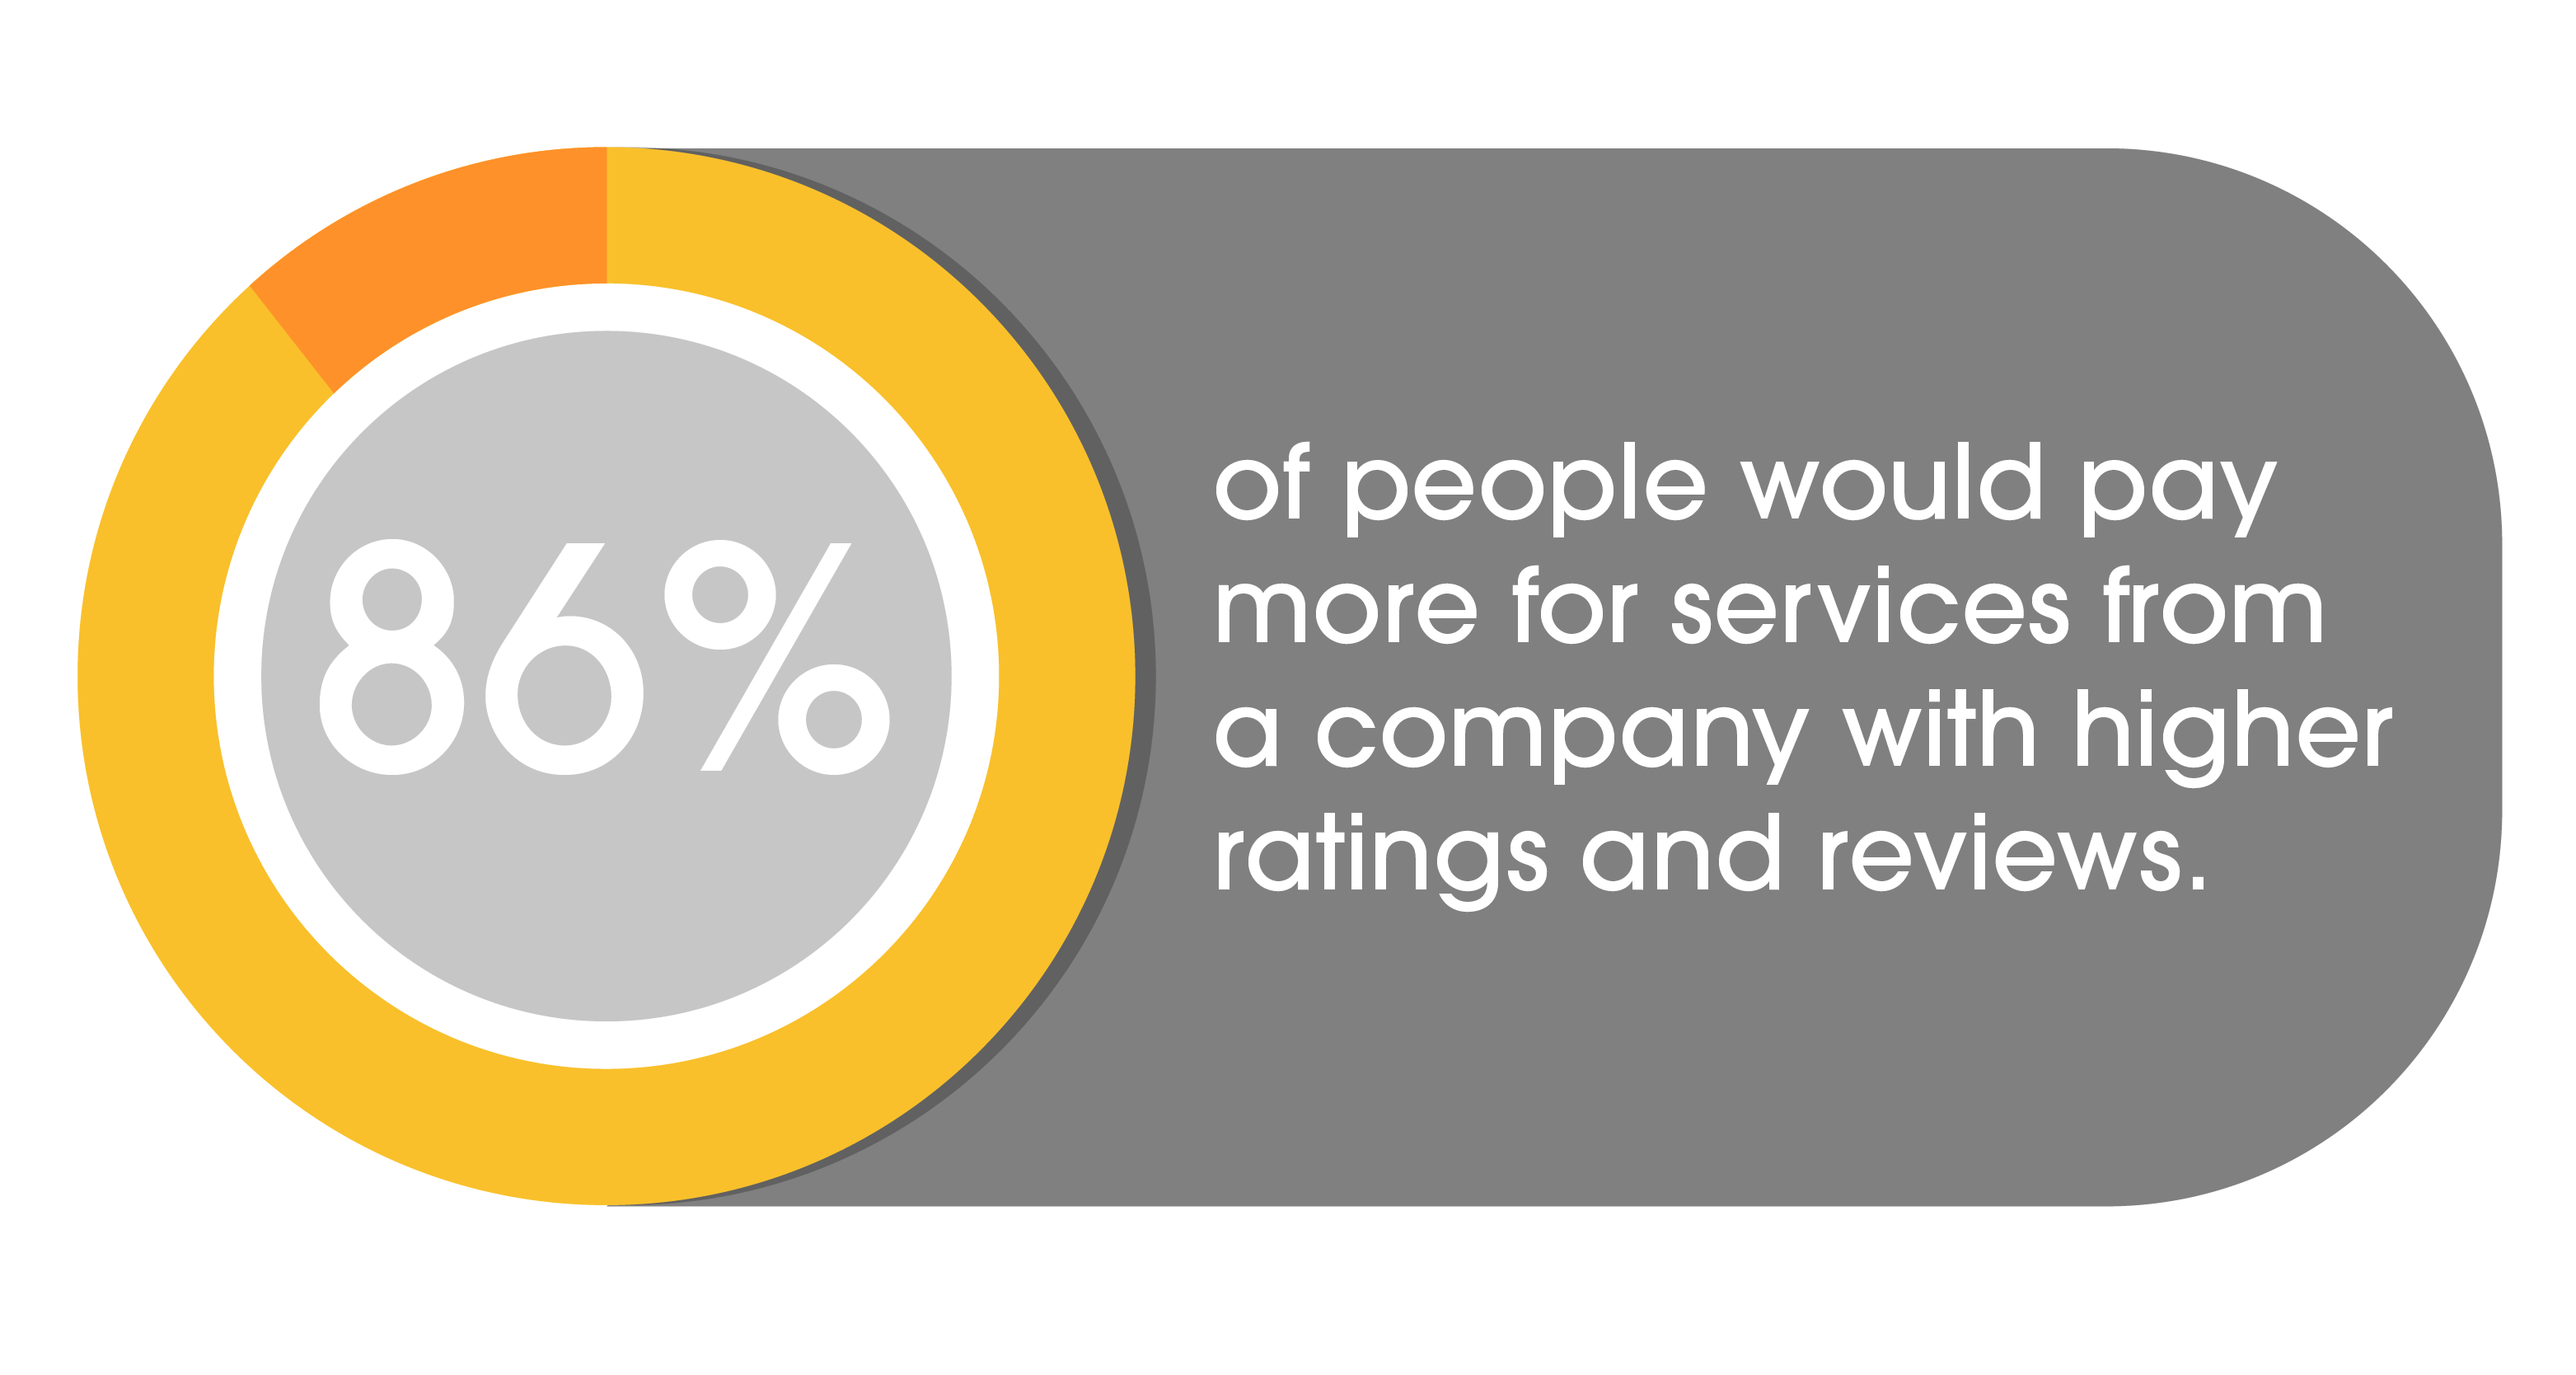 86 percent of people would pay more for services from company with higher ratings and reviews